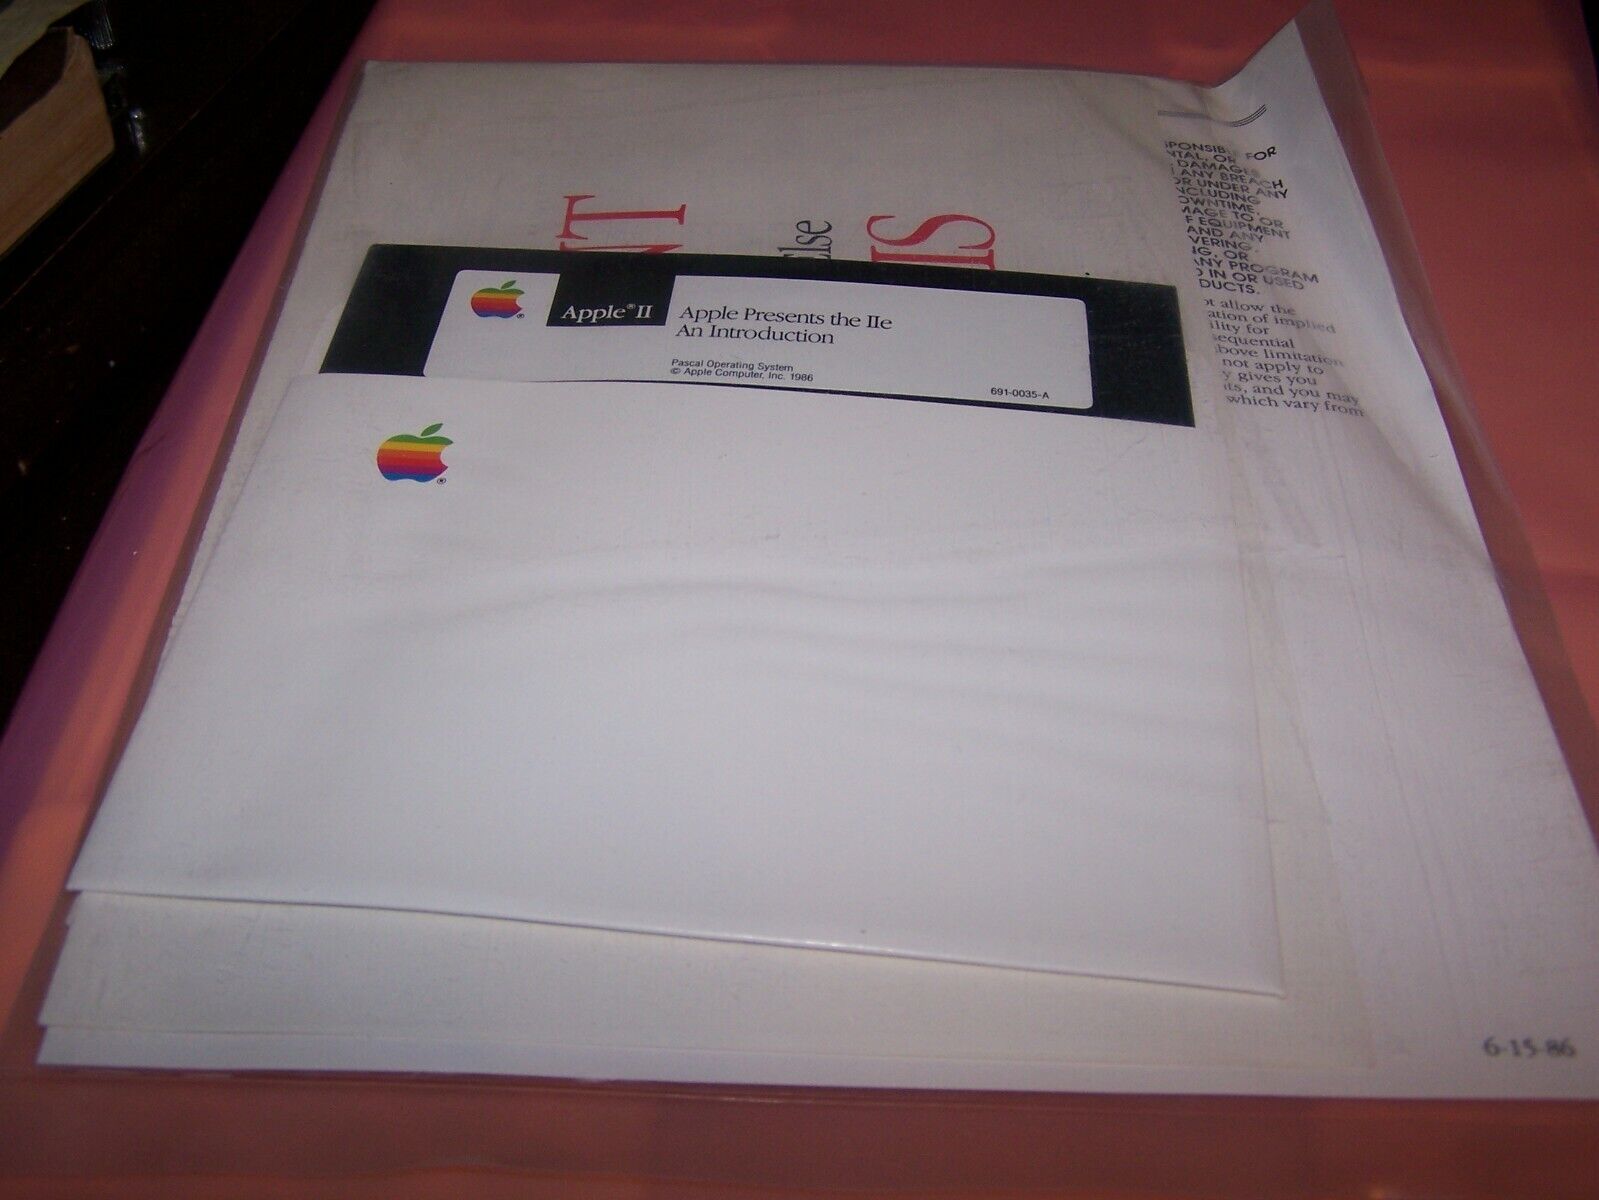 Apple Presents the IIe An Introduction & Getting Down to BASIC - Disks